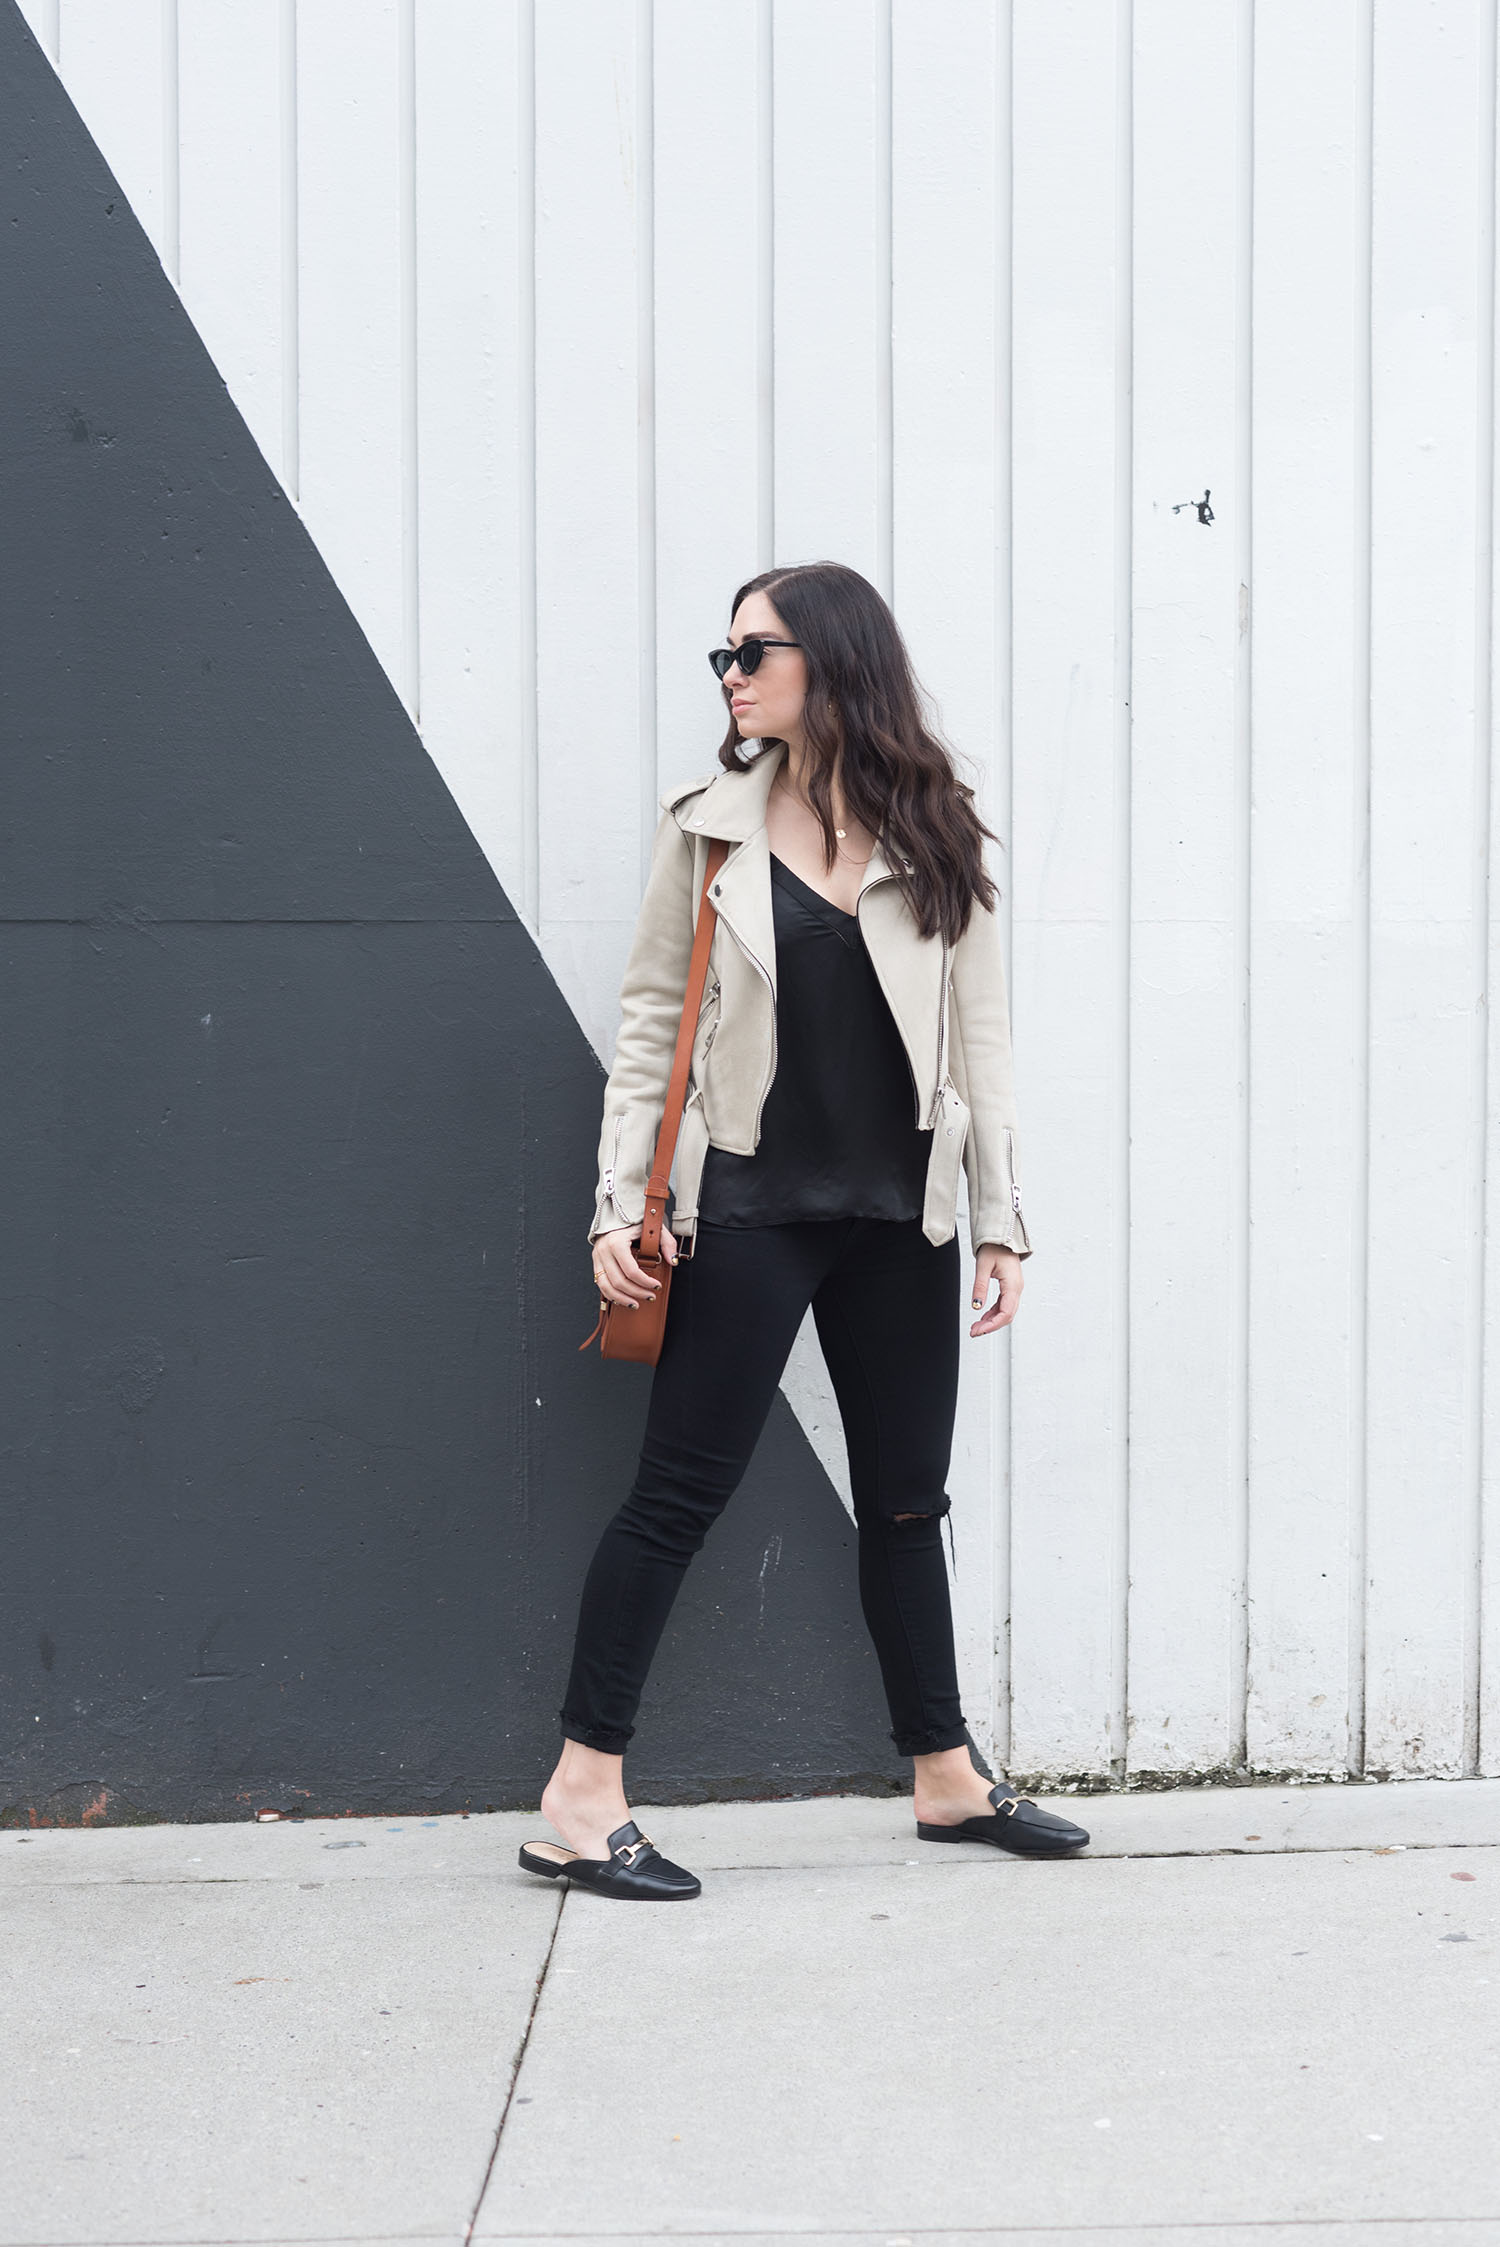 Fashion blogger Cee Fardoe of Coco & Vera walks outside the Burrard Hotel in Vancouver wearing Paige black jeans and an Aritzia silk tank